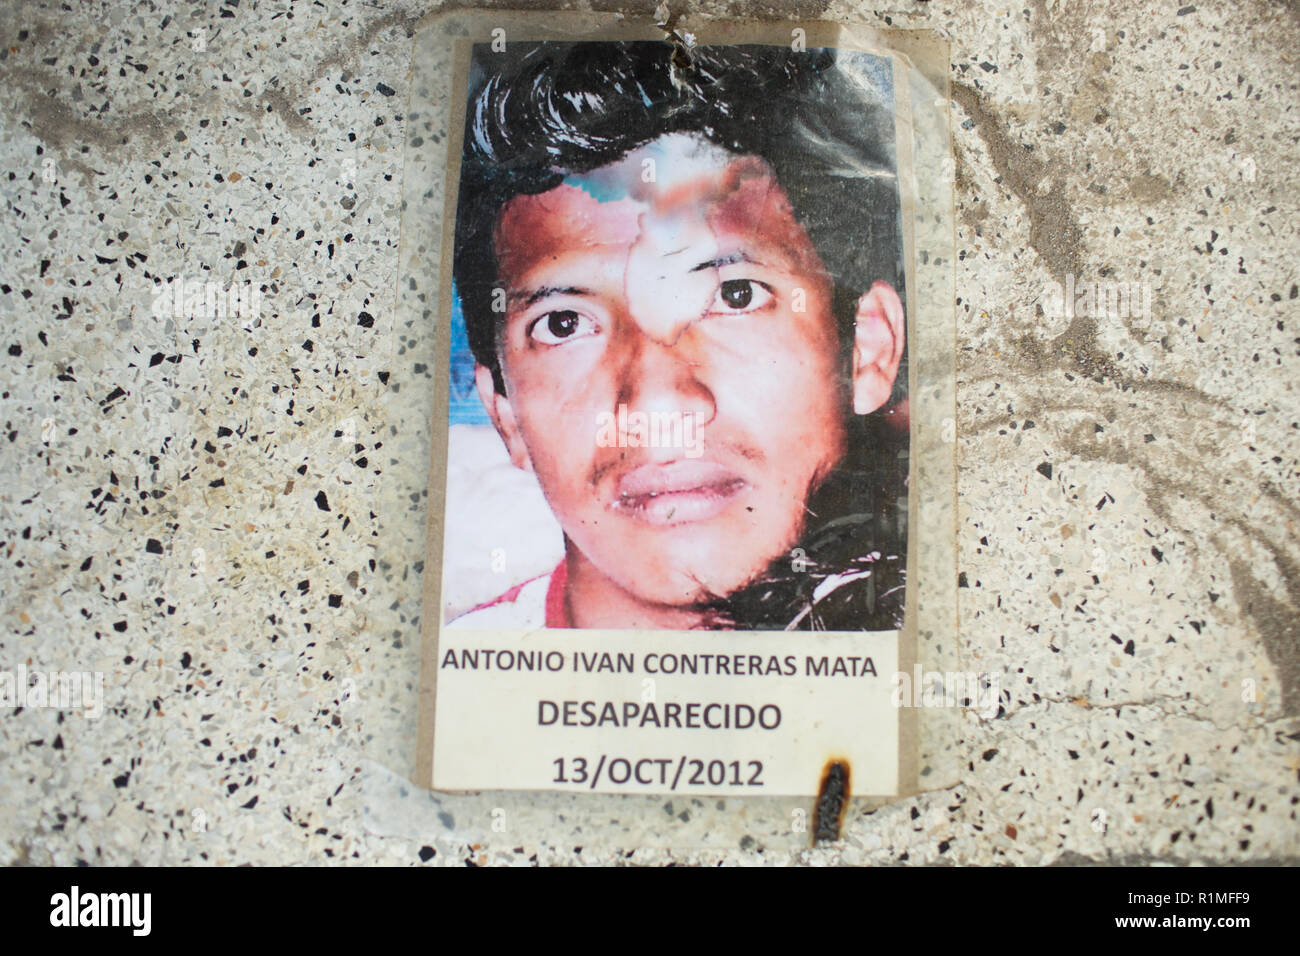 A photo of Antonio Ivan Contreras Mata, who went missing in Iguala, Guerrero, Mexico, October 3, 2012 from the area. He was 28 years old.   A few days prior to Antonio Ivan's disappearance he received a phone call inviting him to work with an organized crime group. Antonio said that he had three children and did not want to be involved in this life style. Guadalupe can not be certain, but he thinks this is possibly what created problems for his son.   Photo captured in Iguala, Guerrero, Mexico, February 6, 2016. Stock Photo